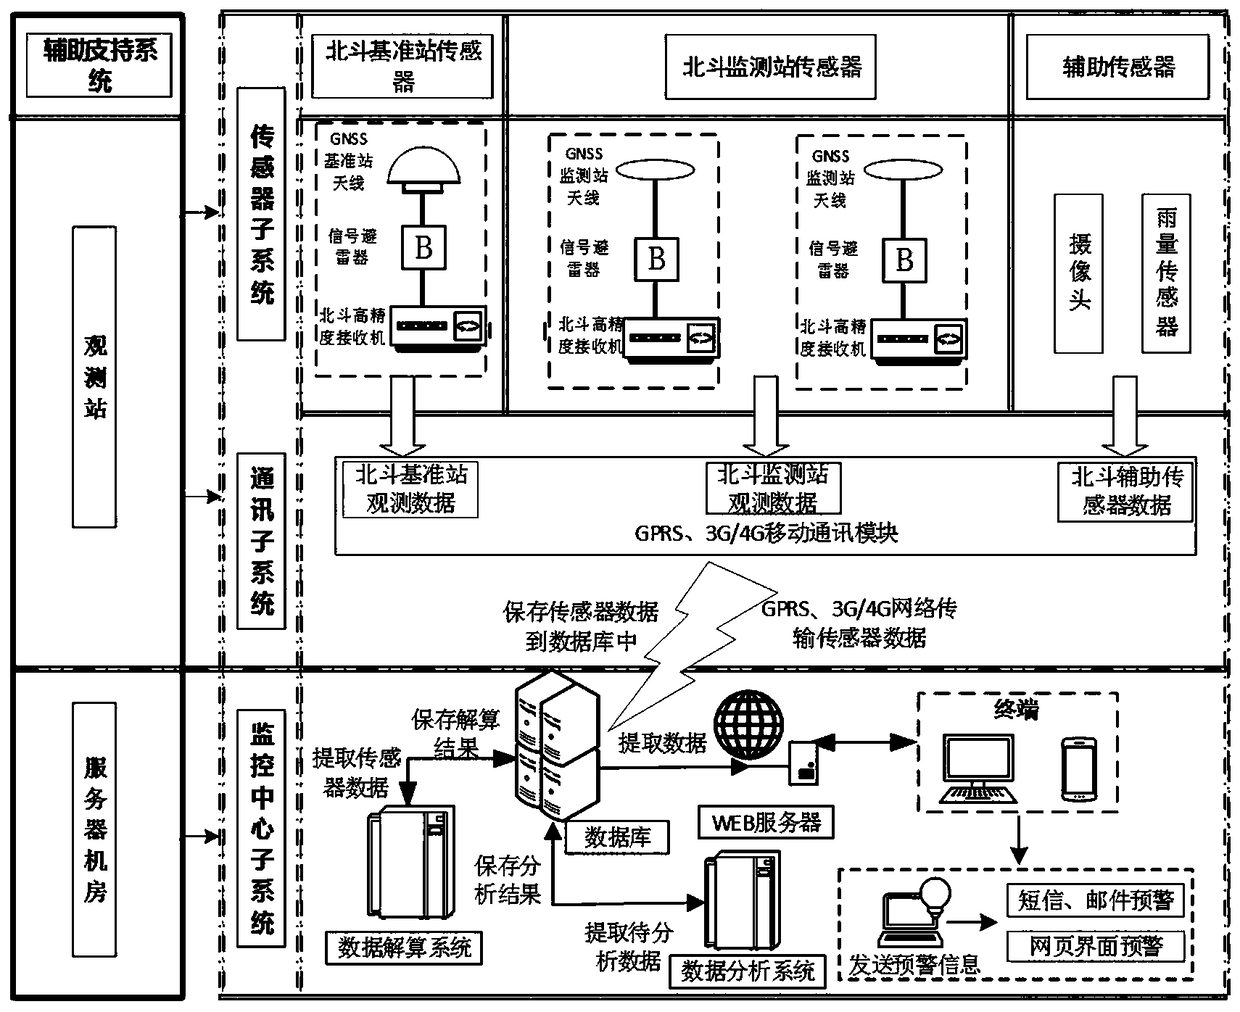 Beidou precision deformation monitoring and early warning system